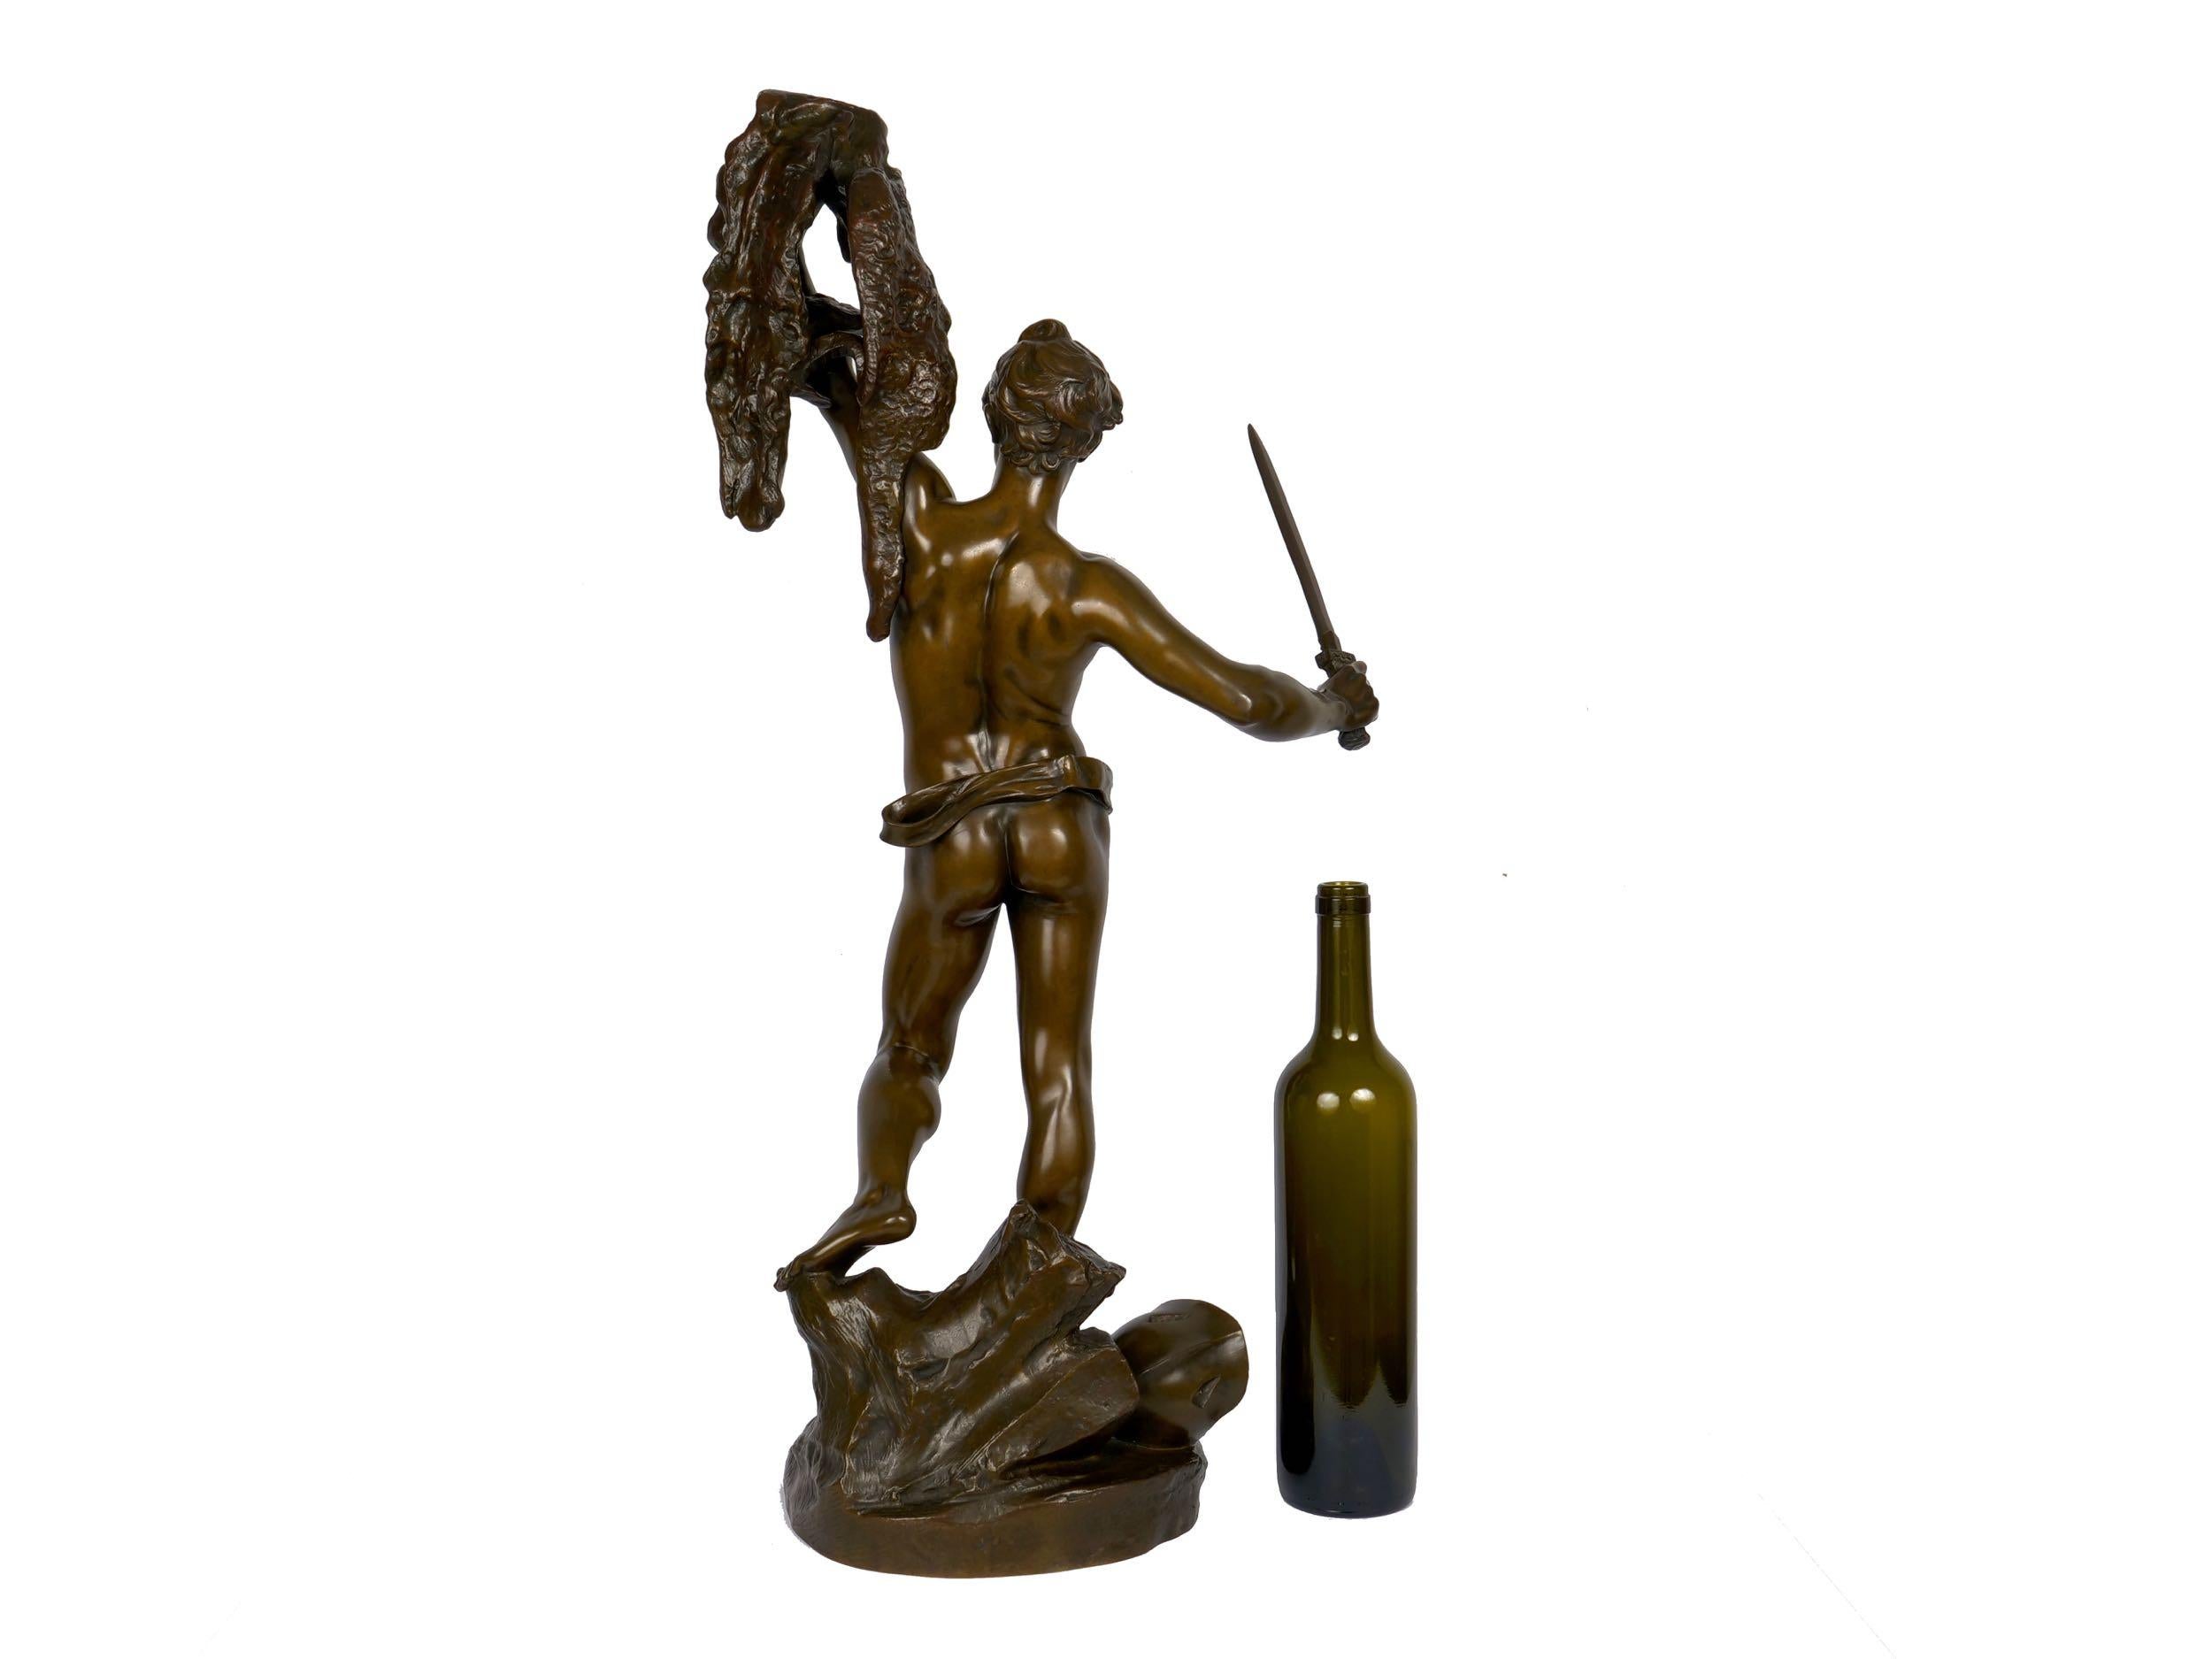 “Jason and the Golden Fleece” '1875' French Bronze Sculpture by Lanson & Susse 1